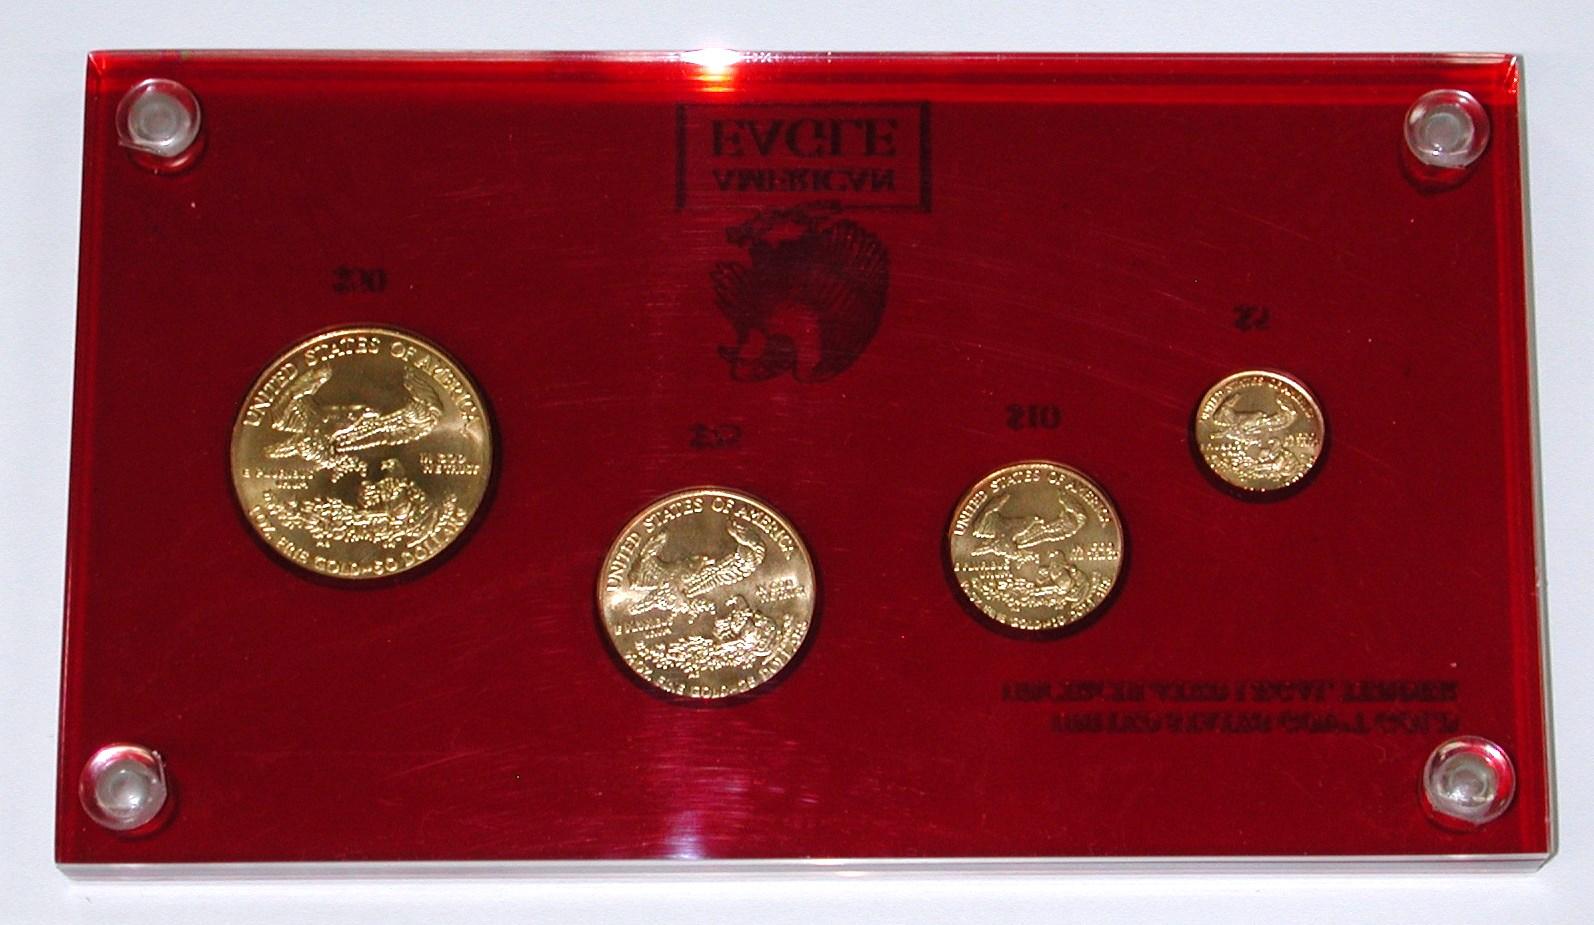 1986 FOUR-COIN GOLD EAGLE SET in HOLDER - 1.85 TROY OUNCES TOTAL